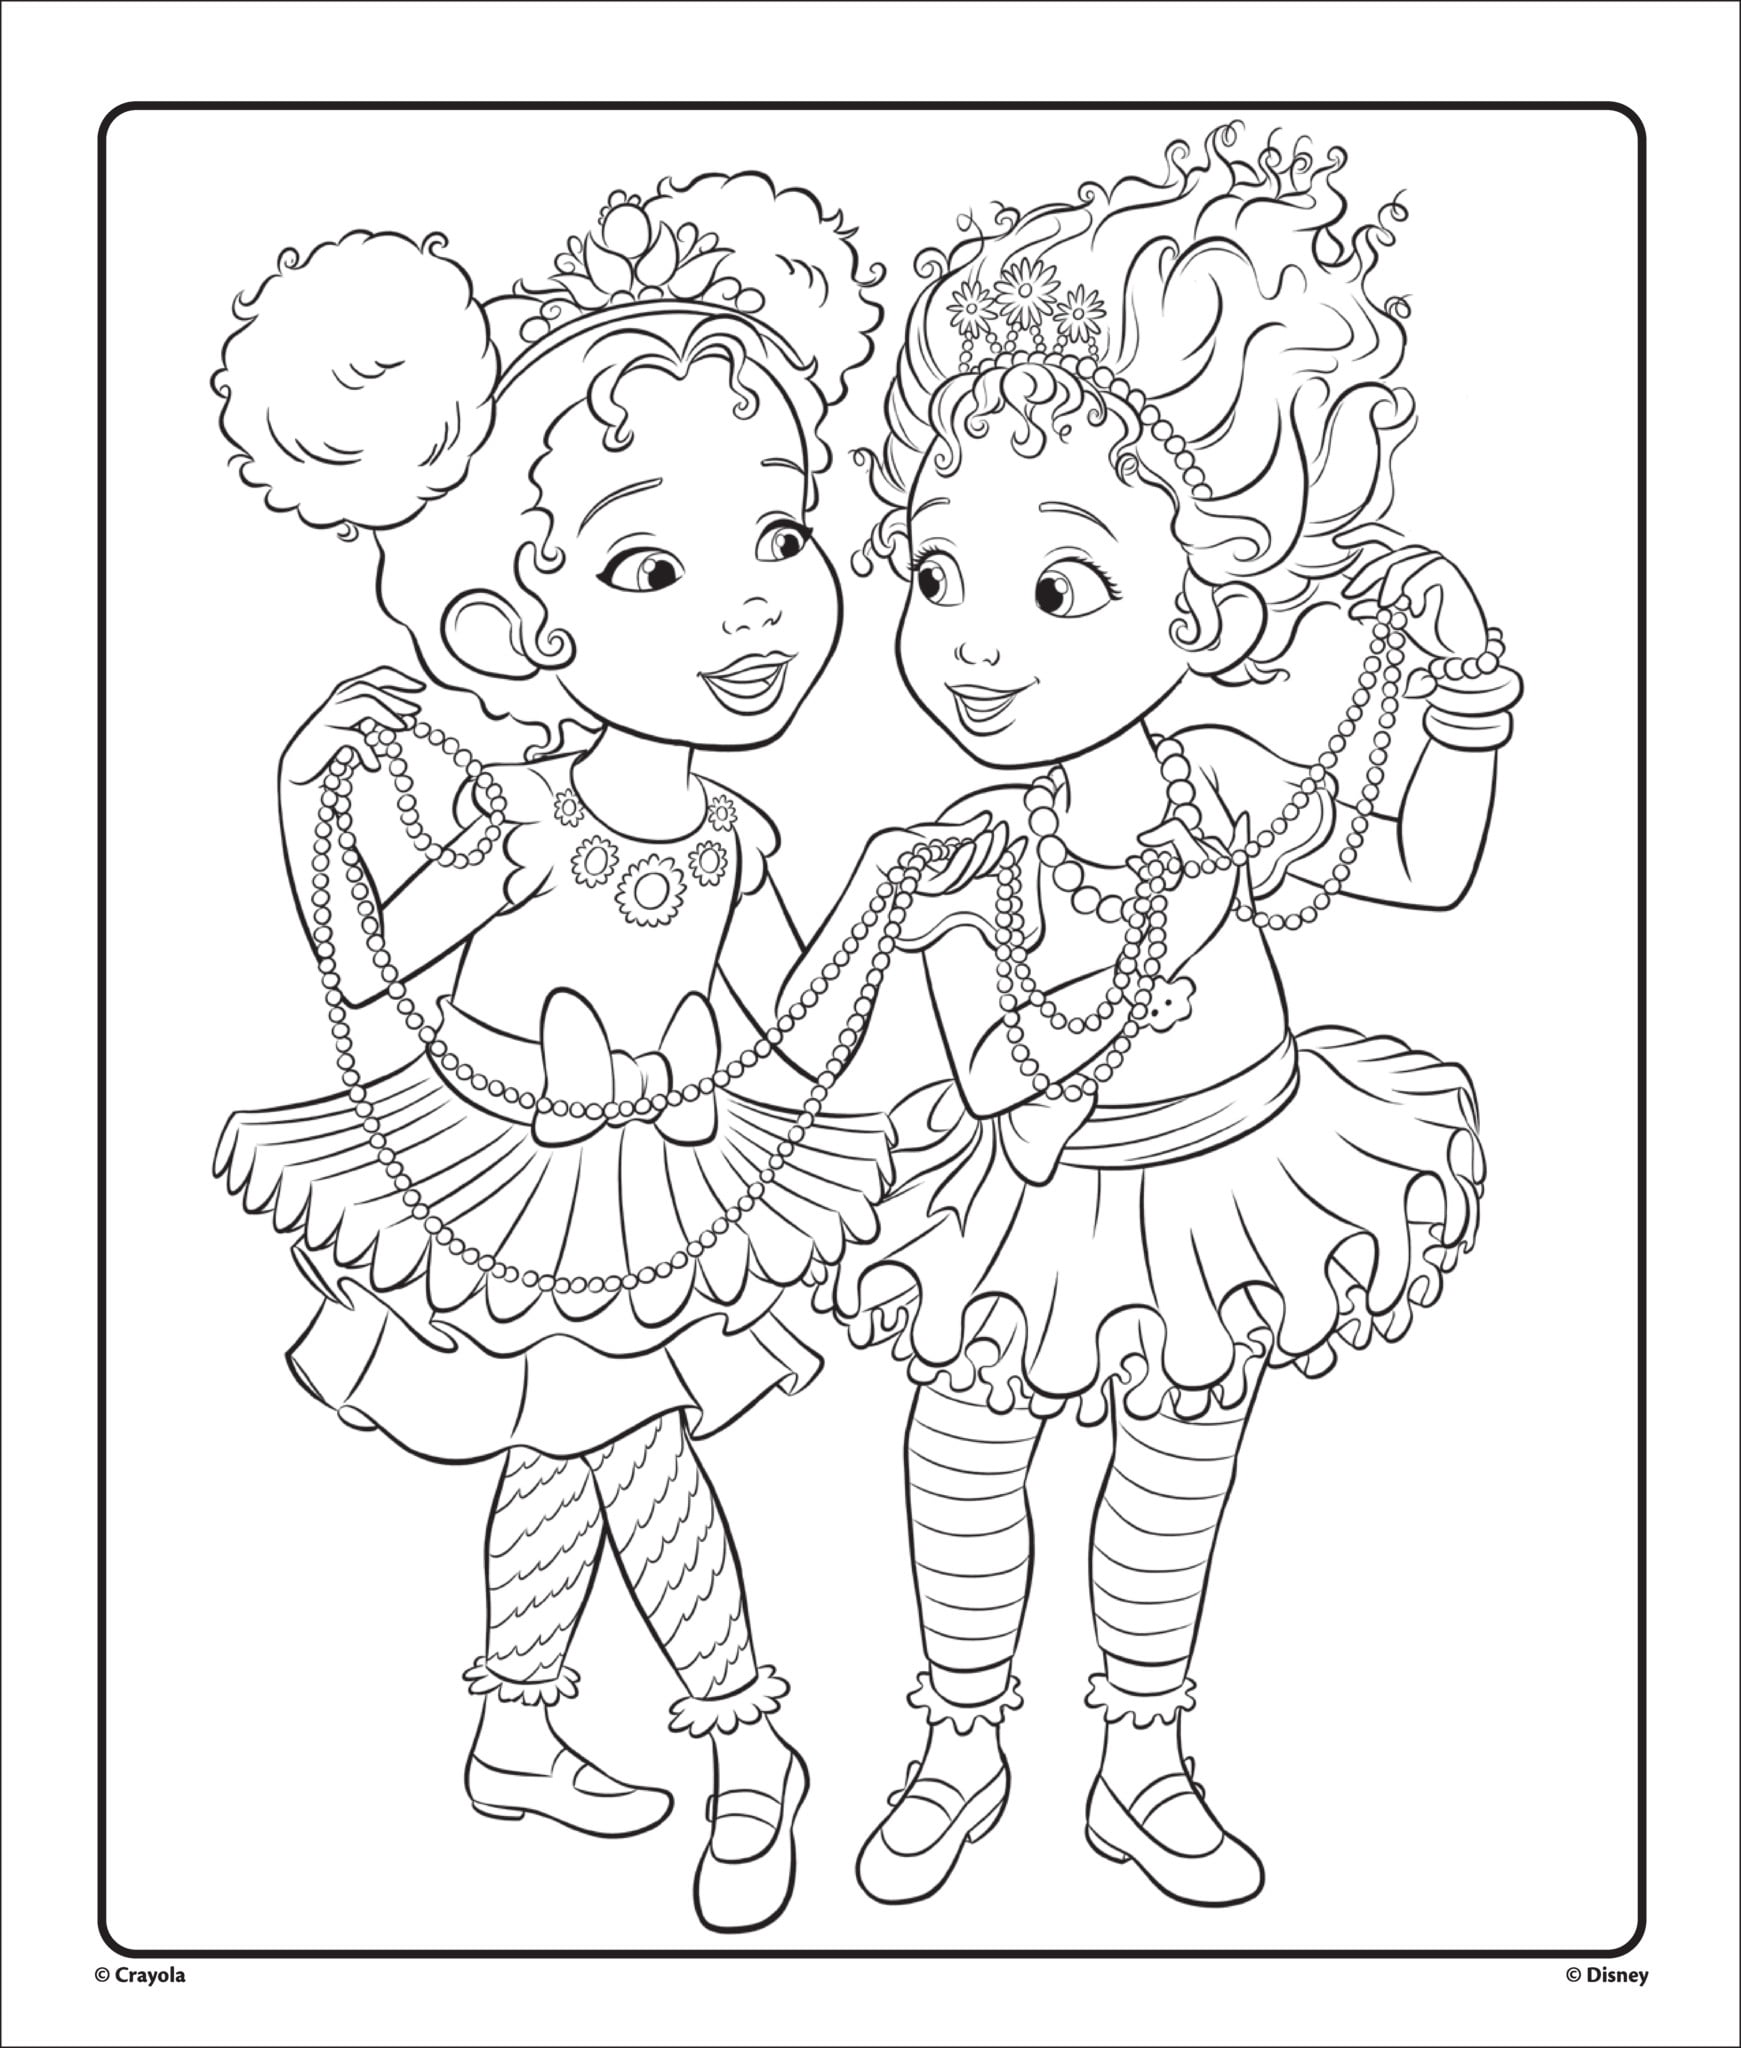 Disney Fancy Nancy Coloring Pages Printable Coloring Pages